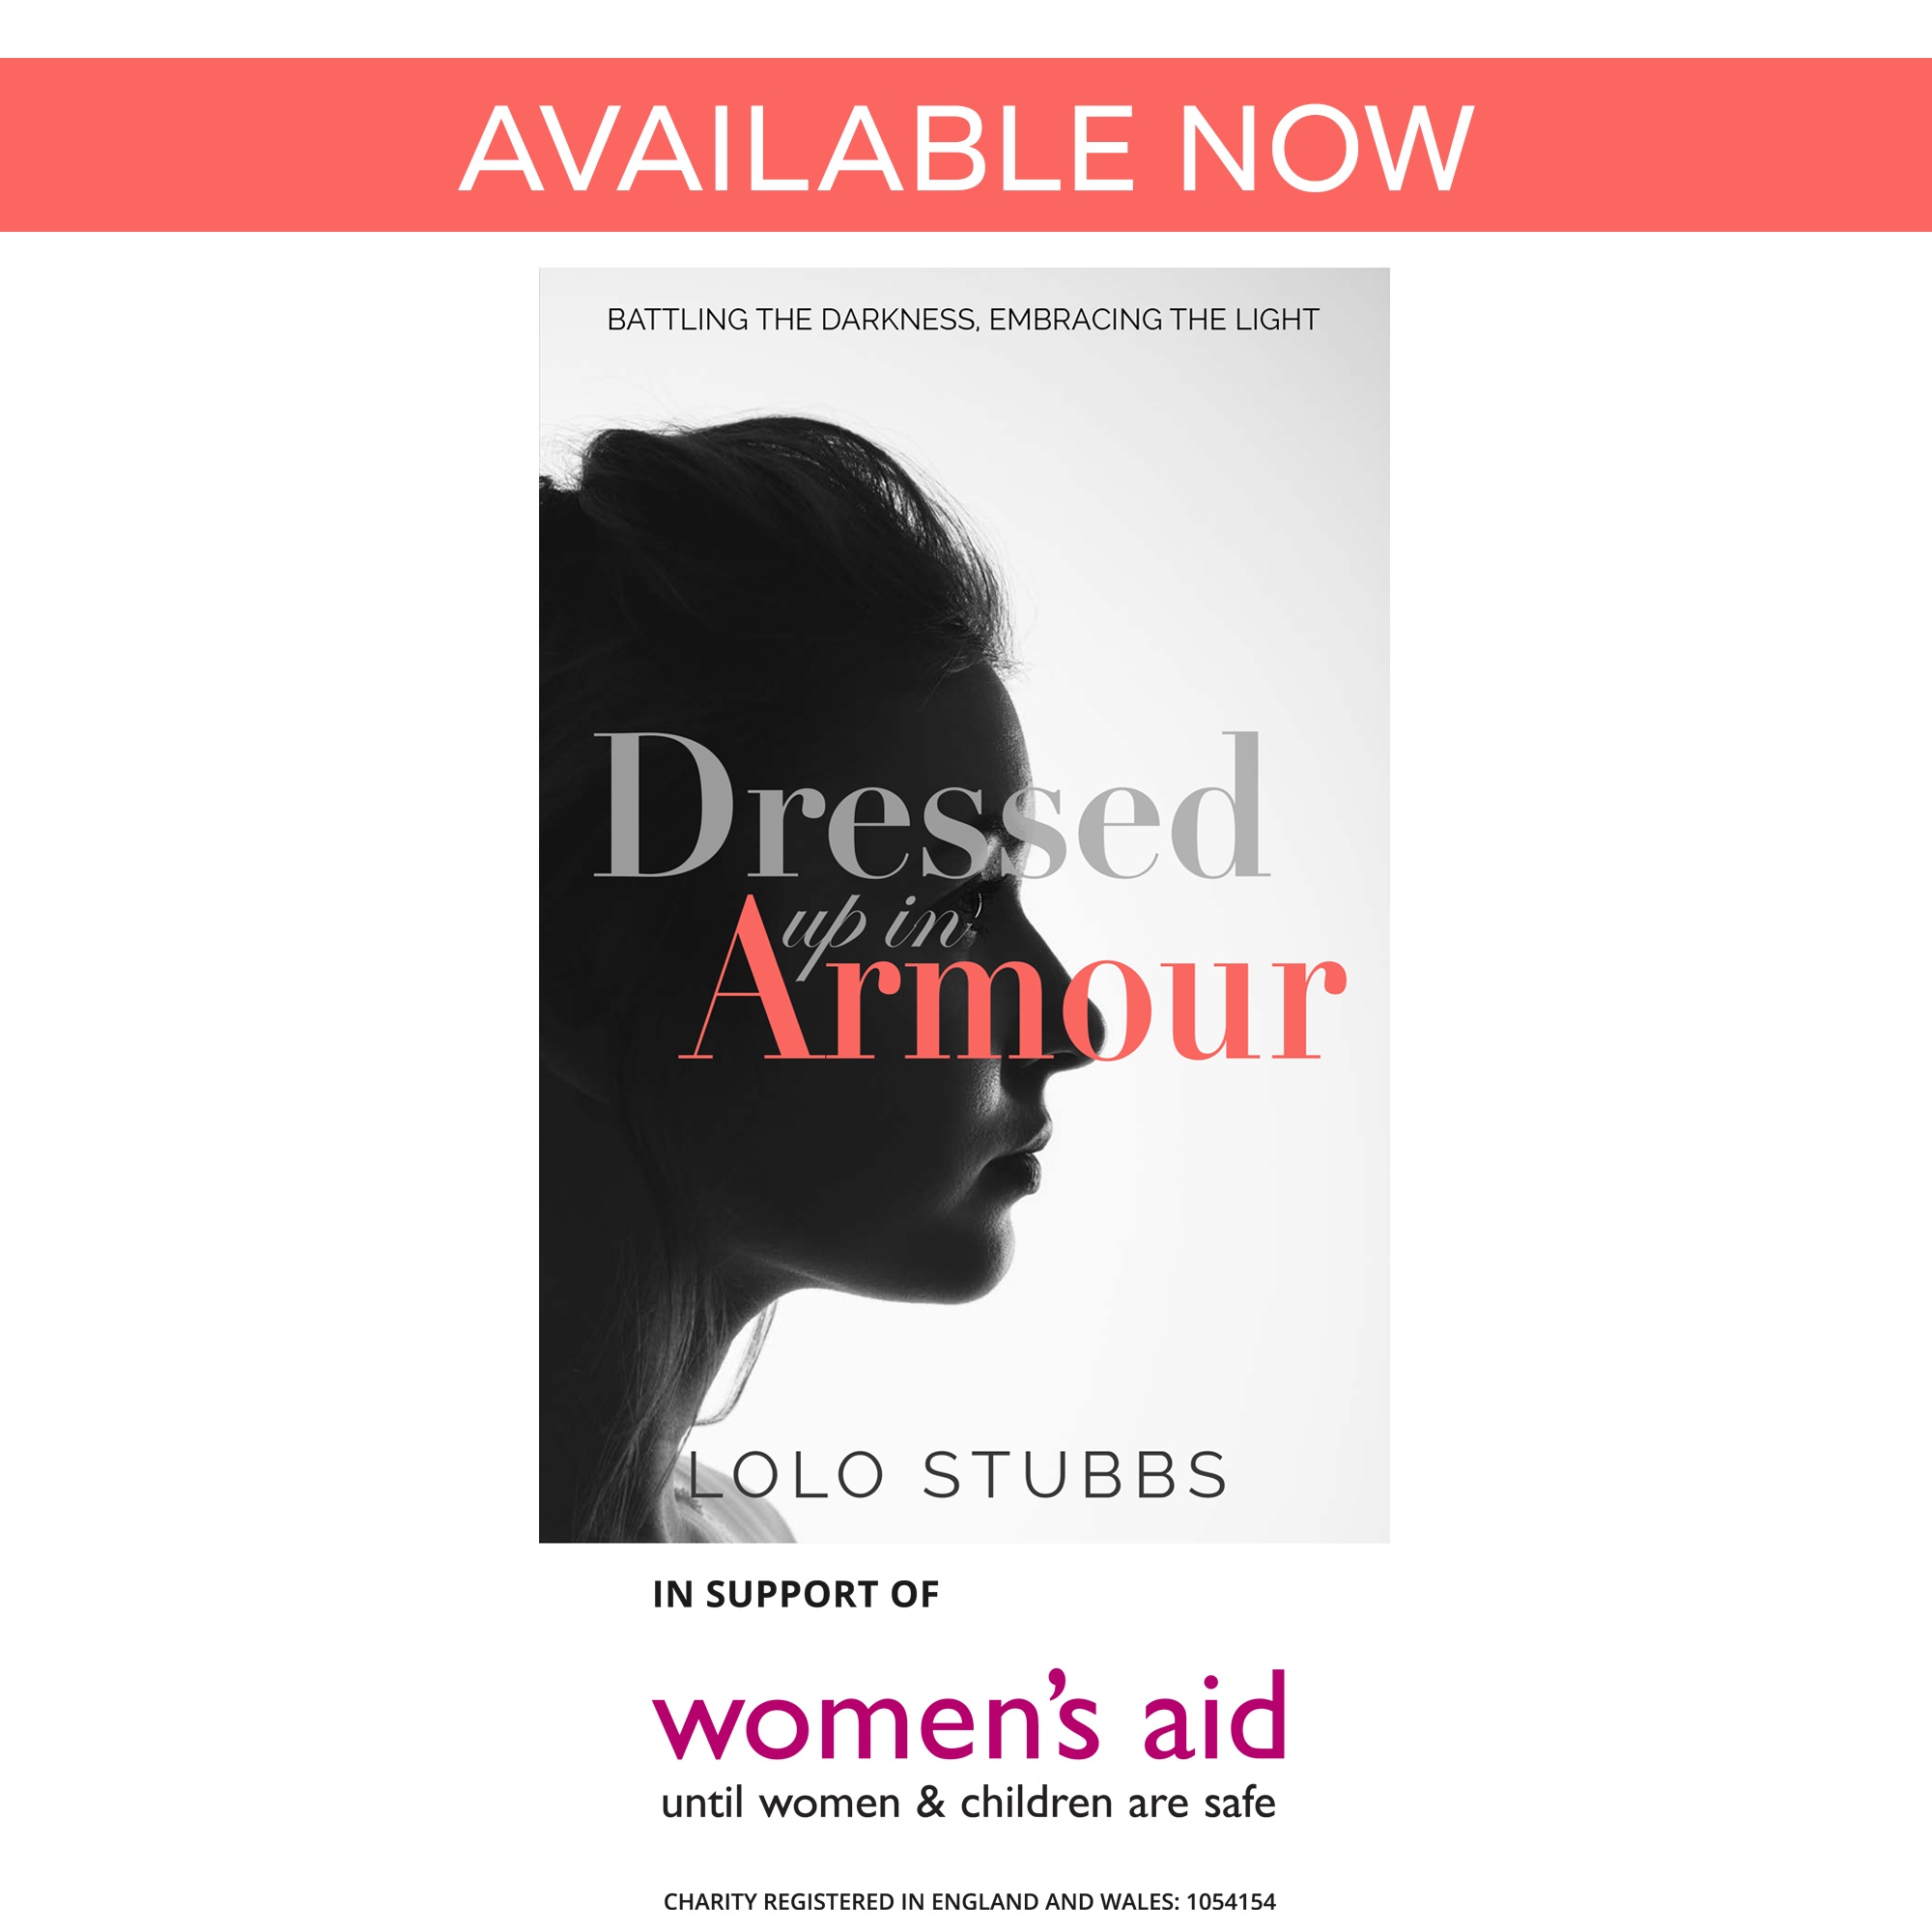 Dressed up in Armour by Lolo Stubbs